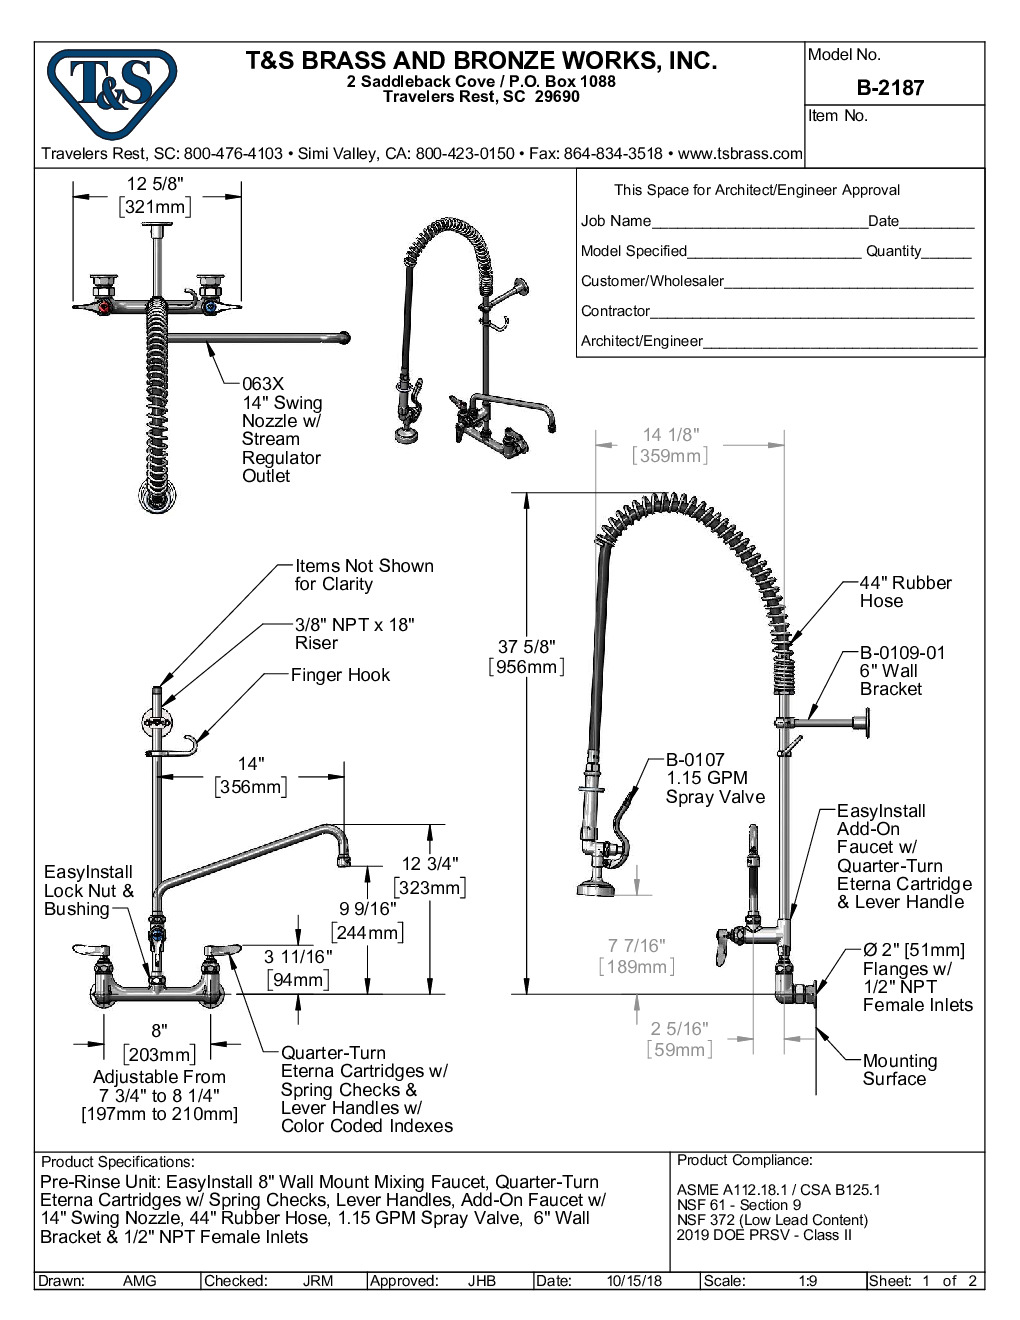 T&S Brass B-2187 with Add On Faucet Pre-Rinse Faucet Assembly